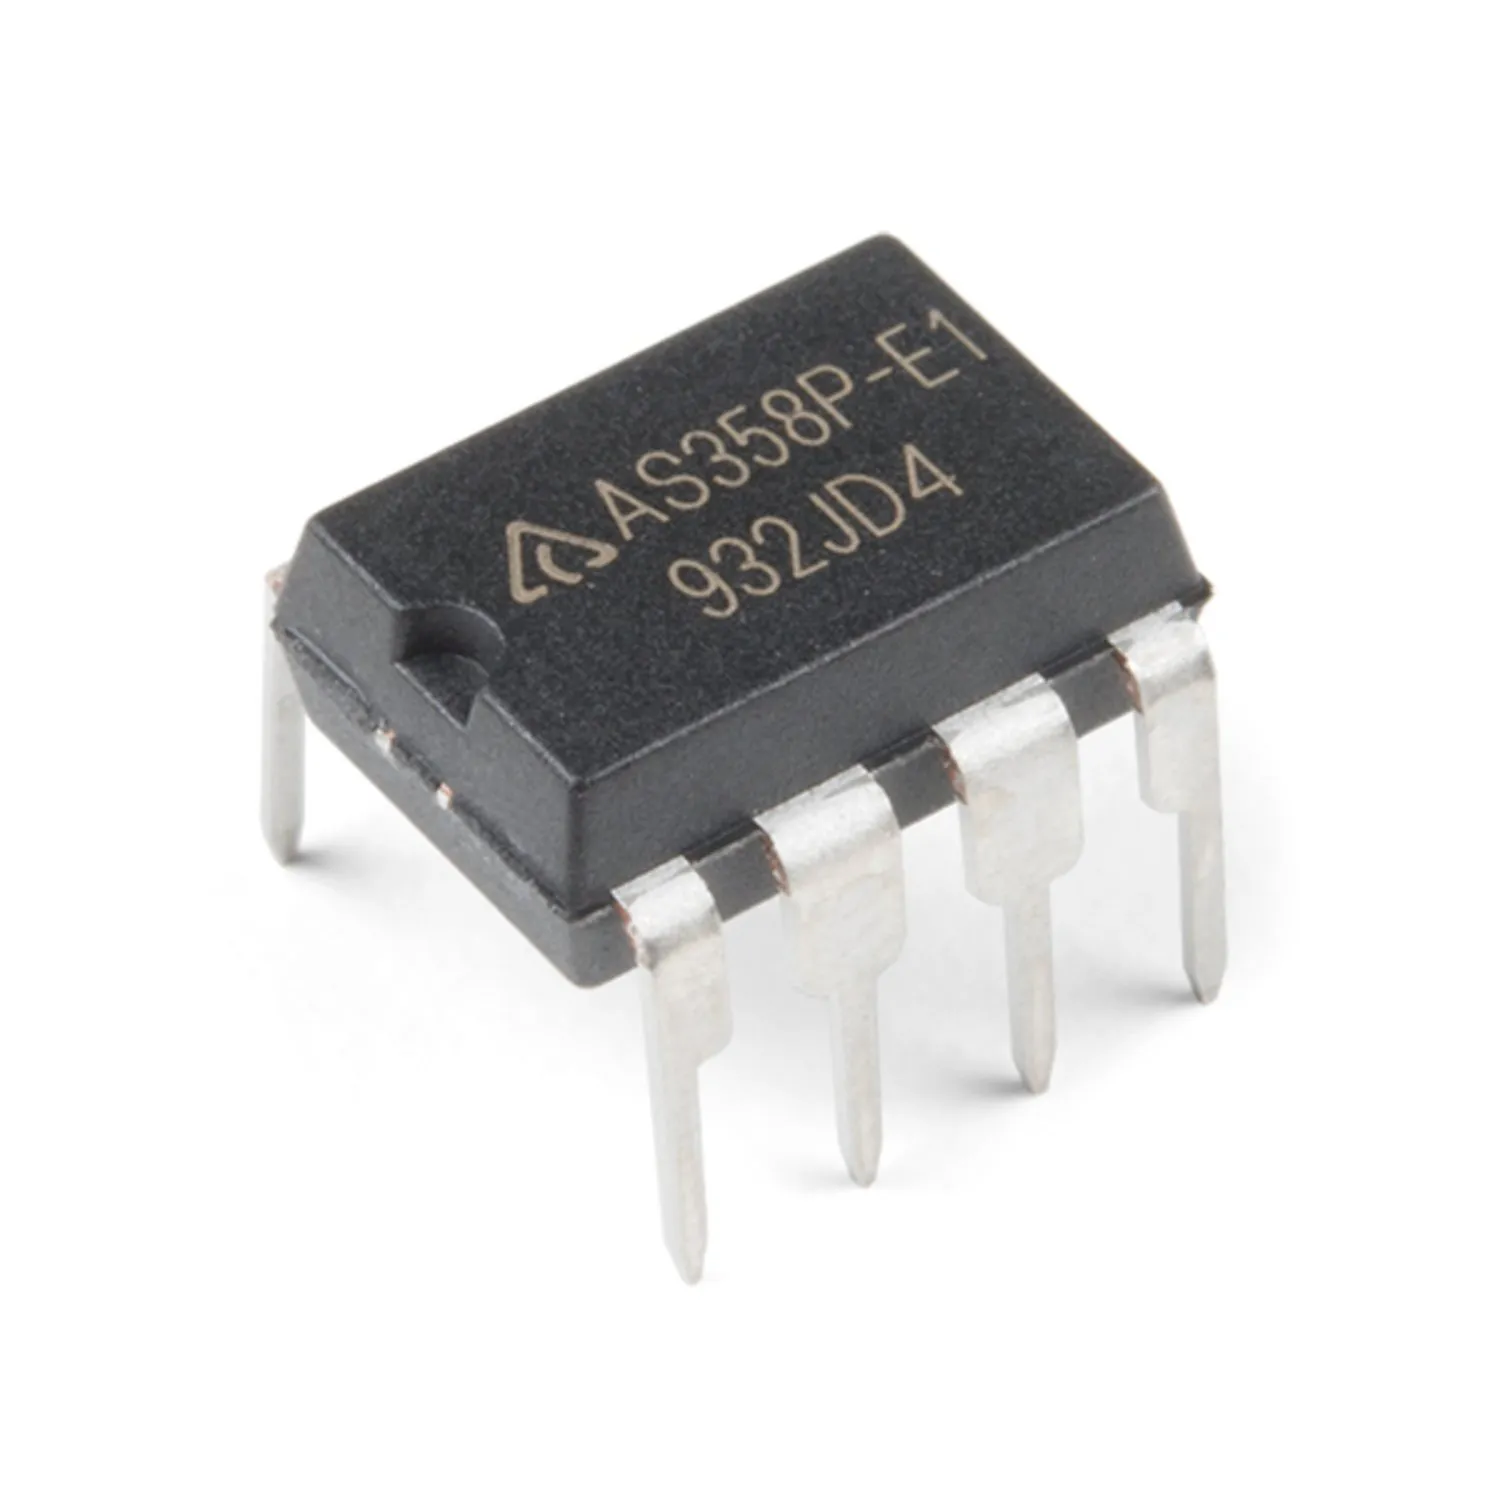 Photo of Op-Amp - AS358P (Through-Hole)